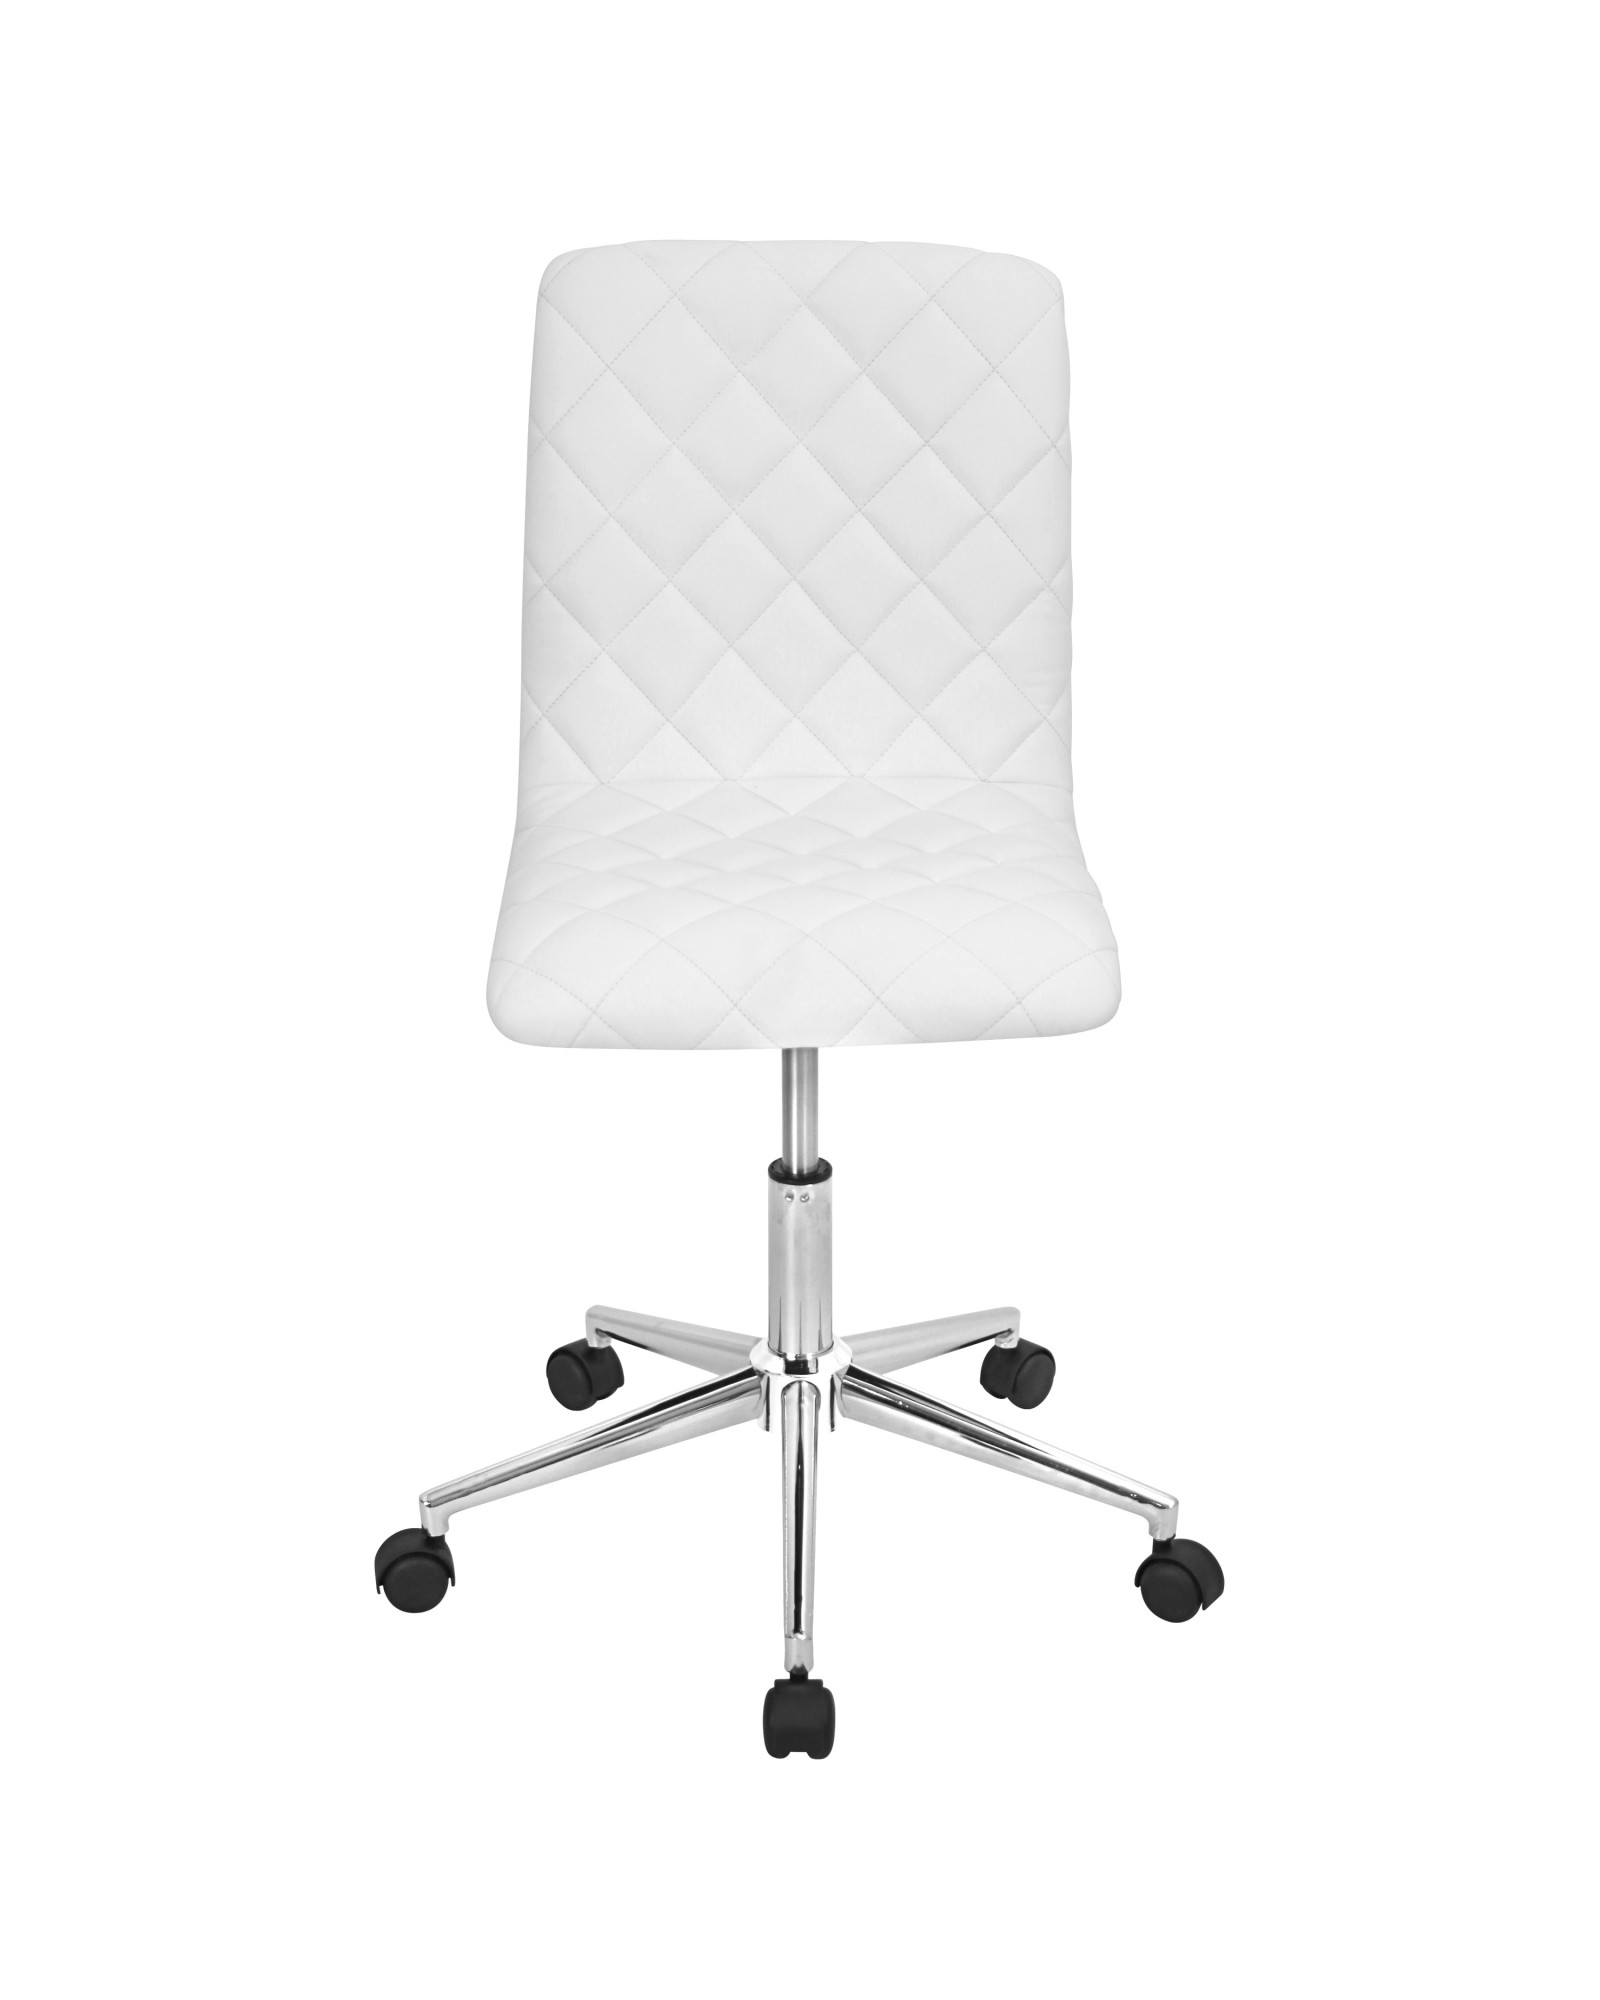 Caviar Contemporary Adjustable Office Chair in White Faux Leather